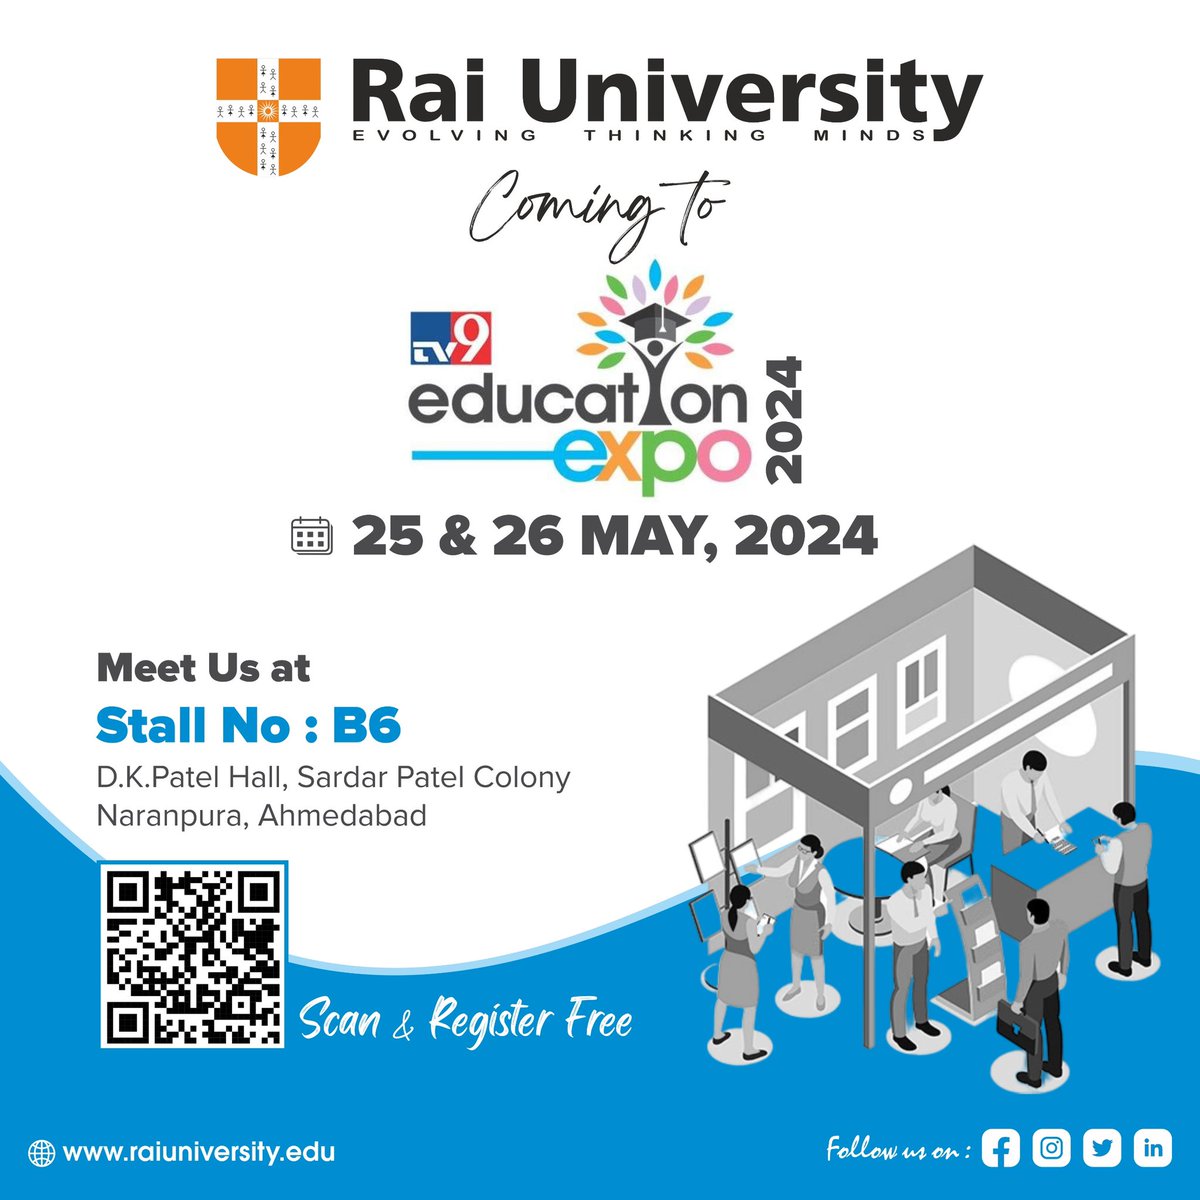 Join us at the Education Expo on May 25-26, 2024! Discover exciting opportunities at Rai University. Visit us at Stall No: B6, D.K.Patel Hall, Sardar Patel Colony, Naranpura, Ahmedabad. #RaiUniversity #EducationExpo2024 #AhmedabadEvents #FutureReady #HigherEducation #Admissions